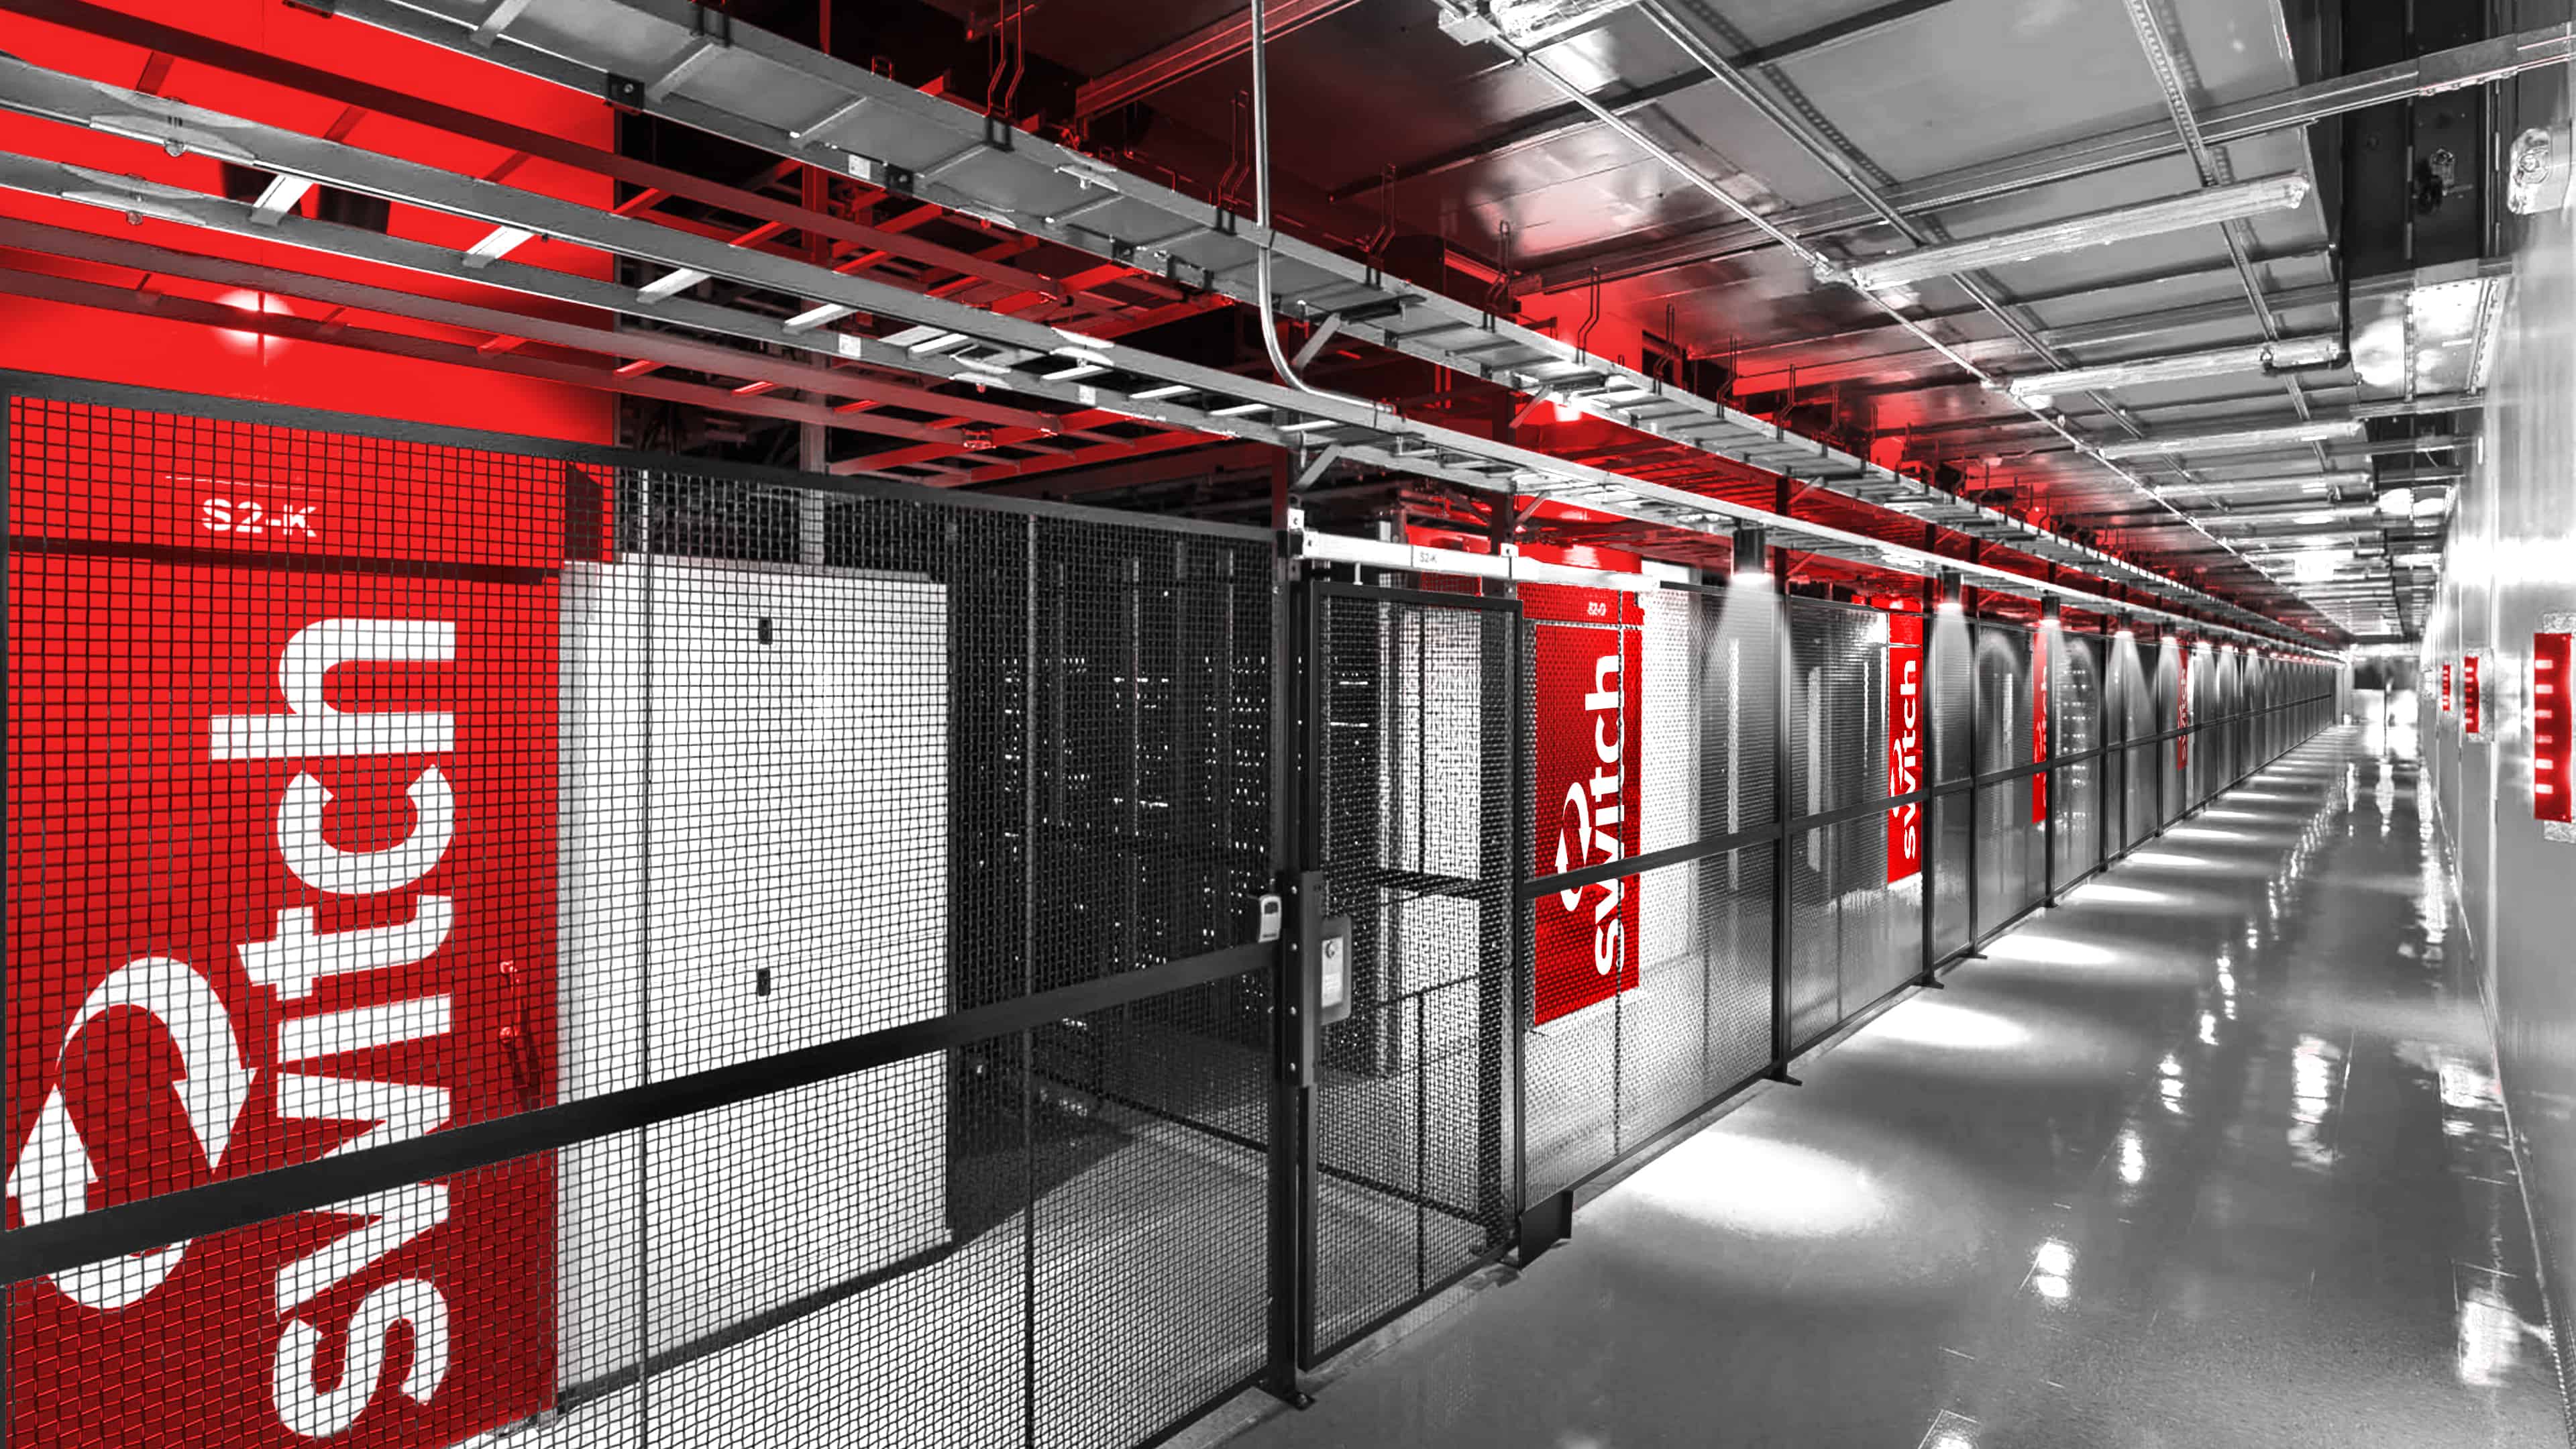 Worldpay Establishes New Data Center Presence  within Switch Hyperscale Data Center Ecosystem